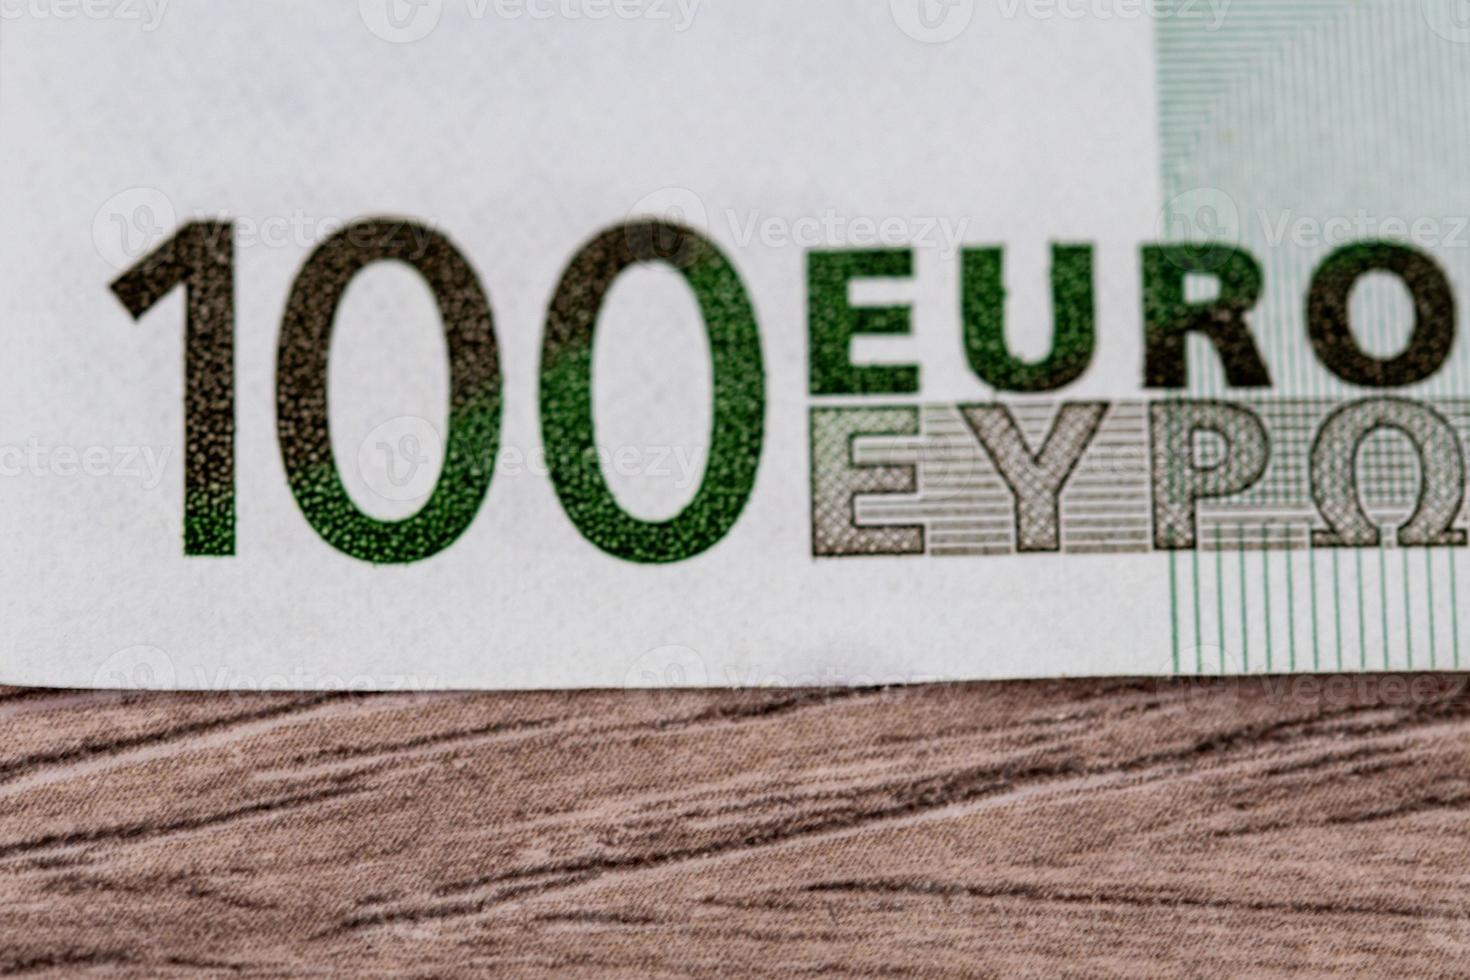 detail of a 100 euro banknote photo